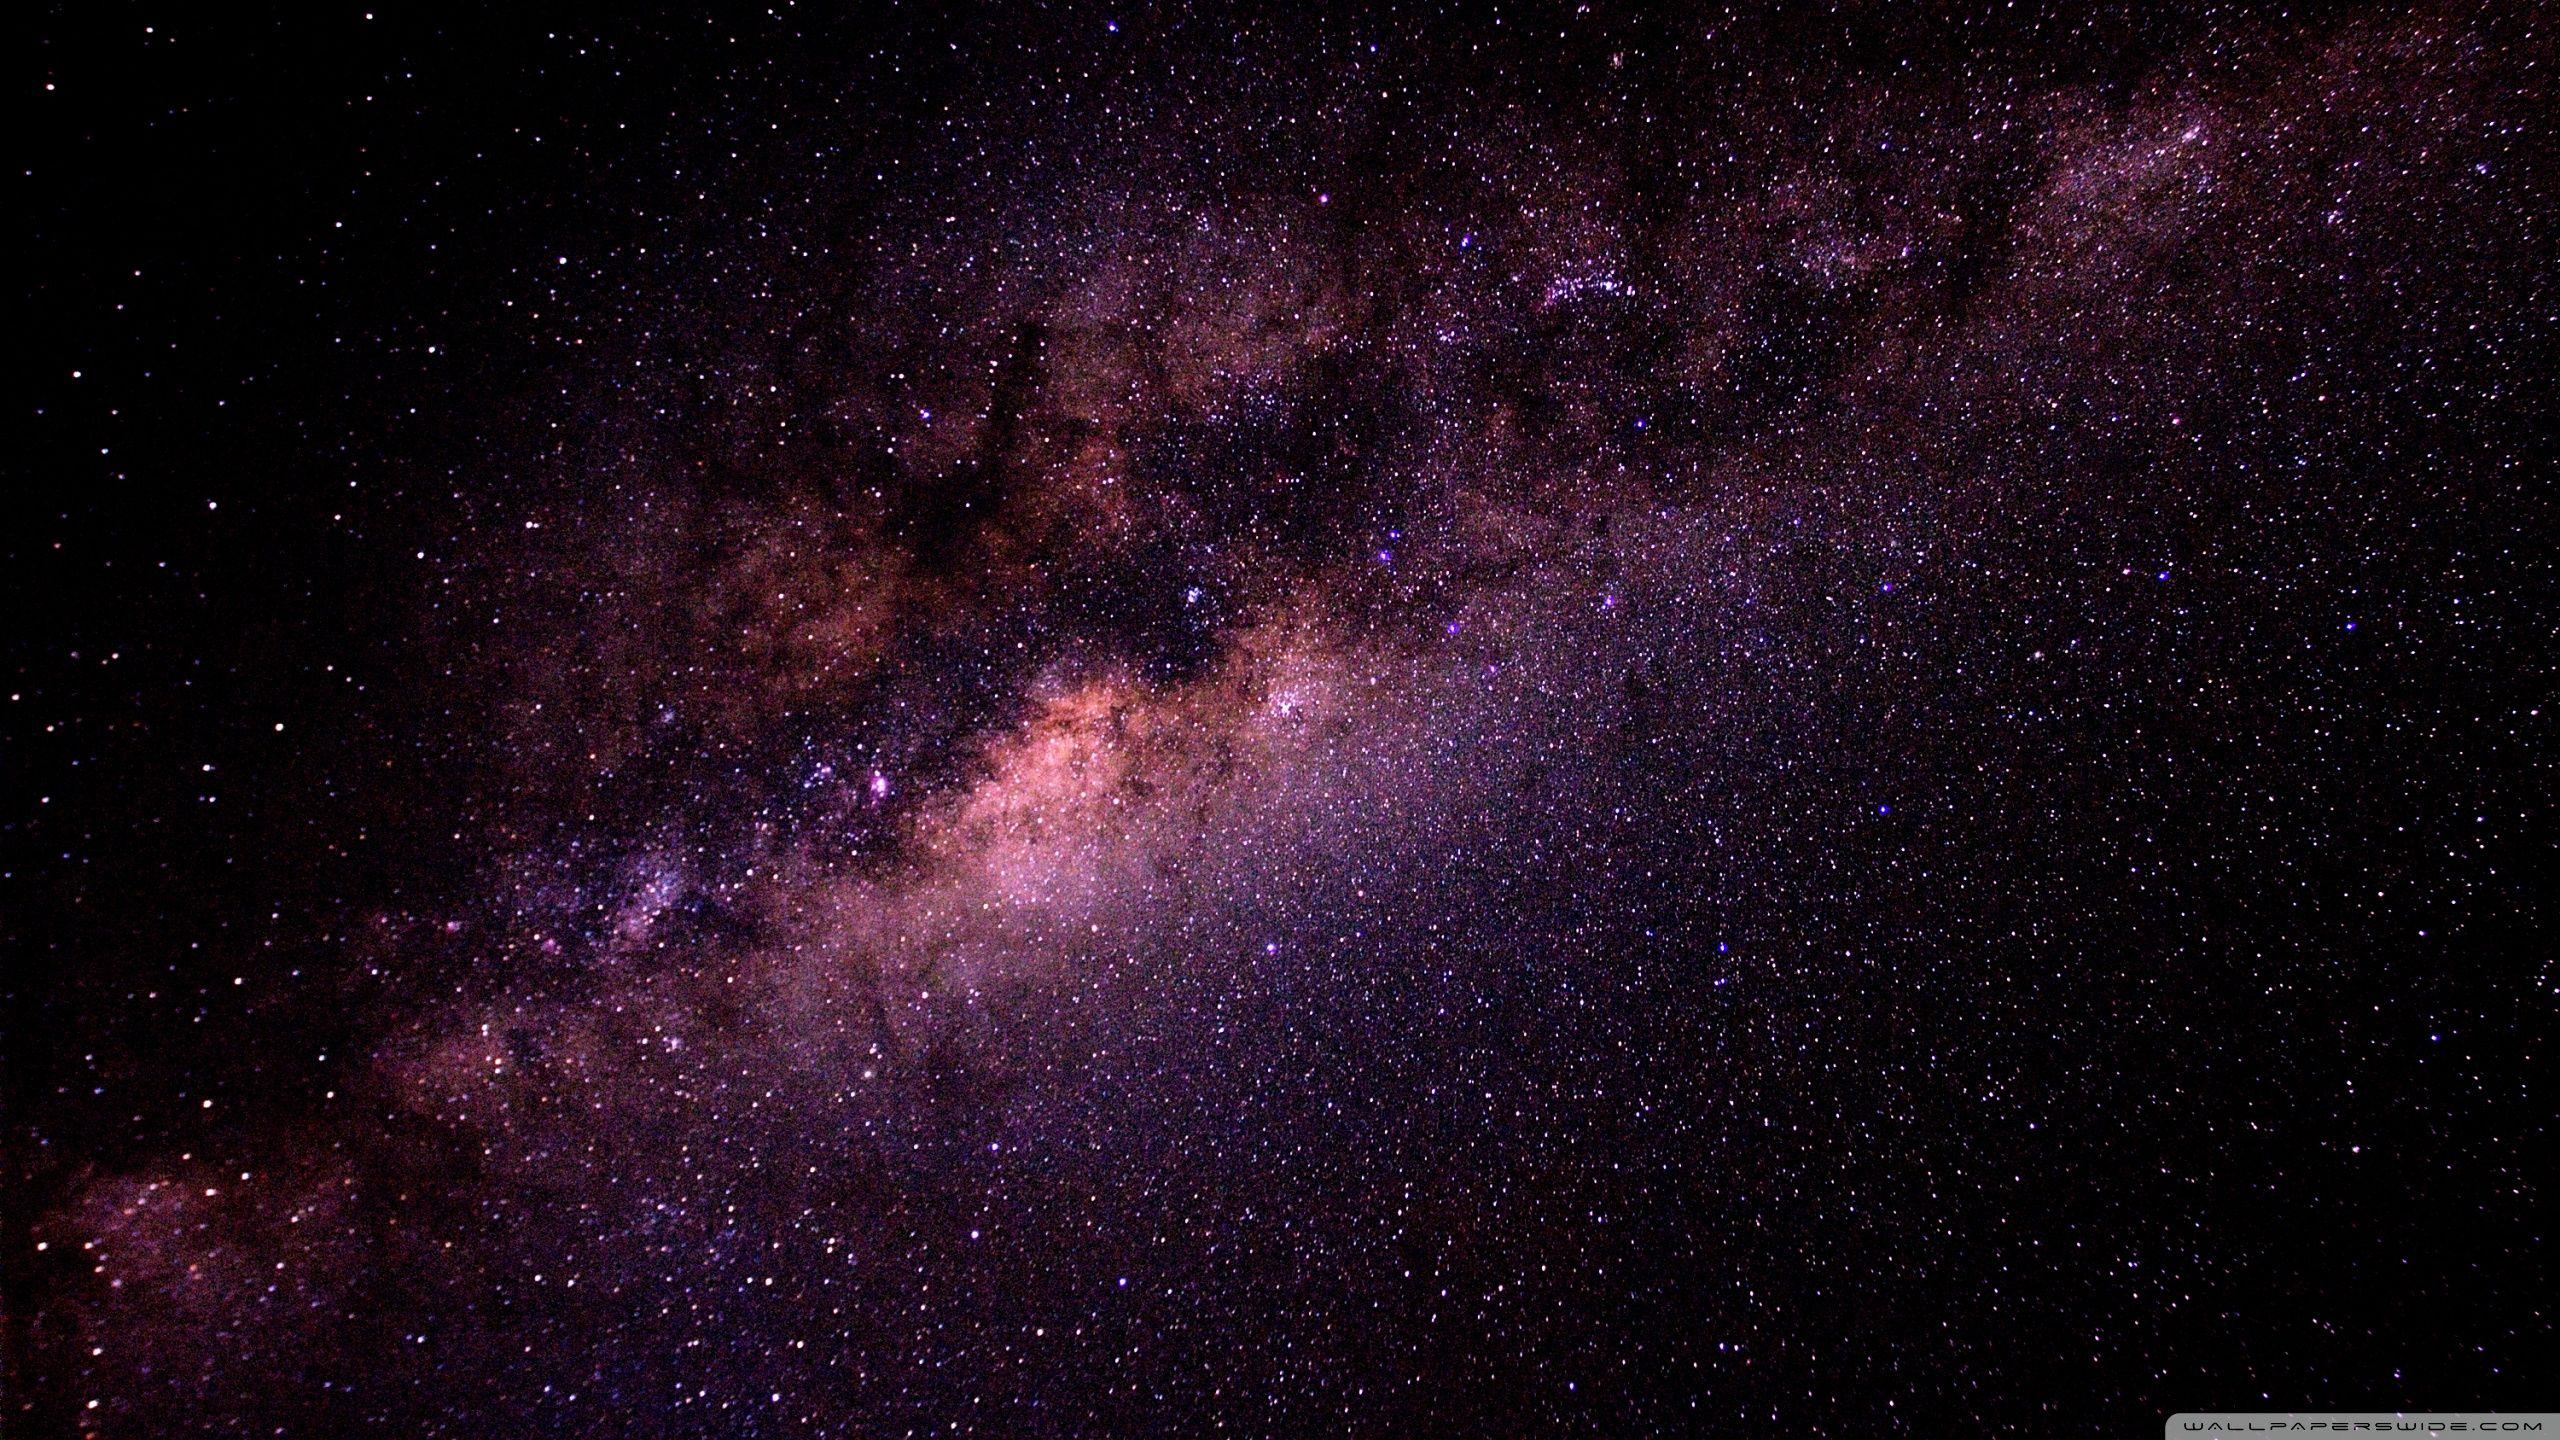 Milky Way Hd Wallpapers Top Free Milky Way Hd Backgrounds Wallpaperaccess